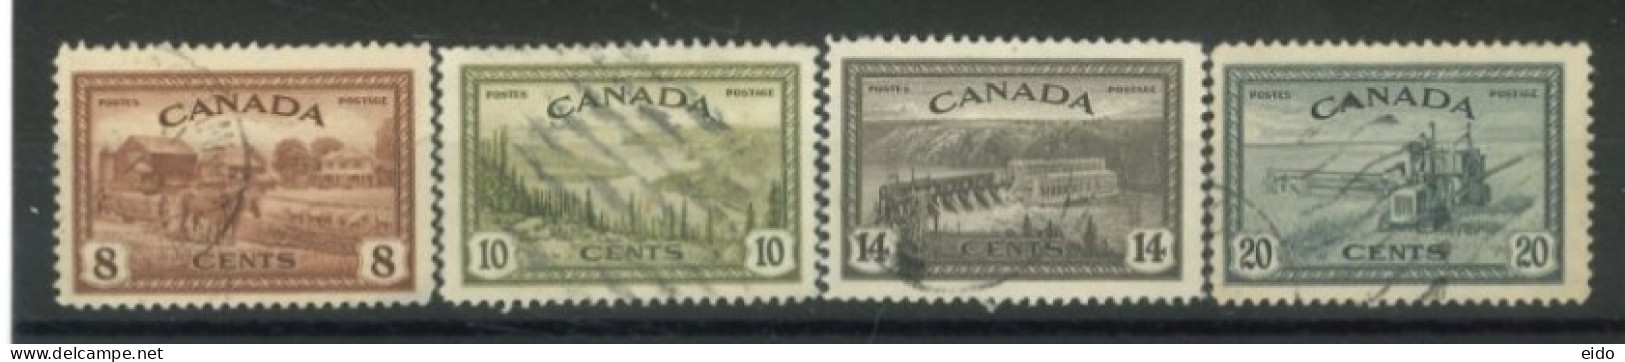 CANADA - 1946, RE CONVERTION TO PEACE STAMPS SET OF 4, USED. - Usati